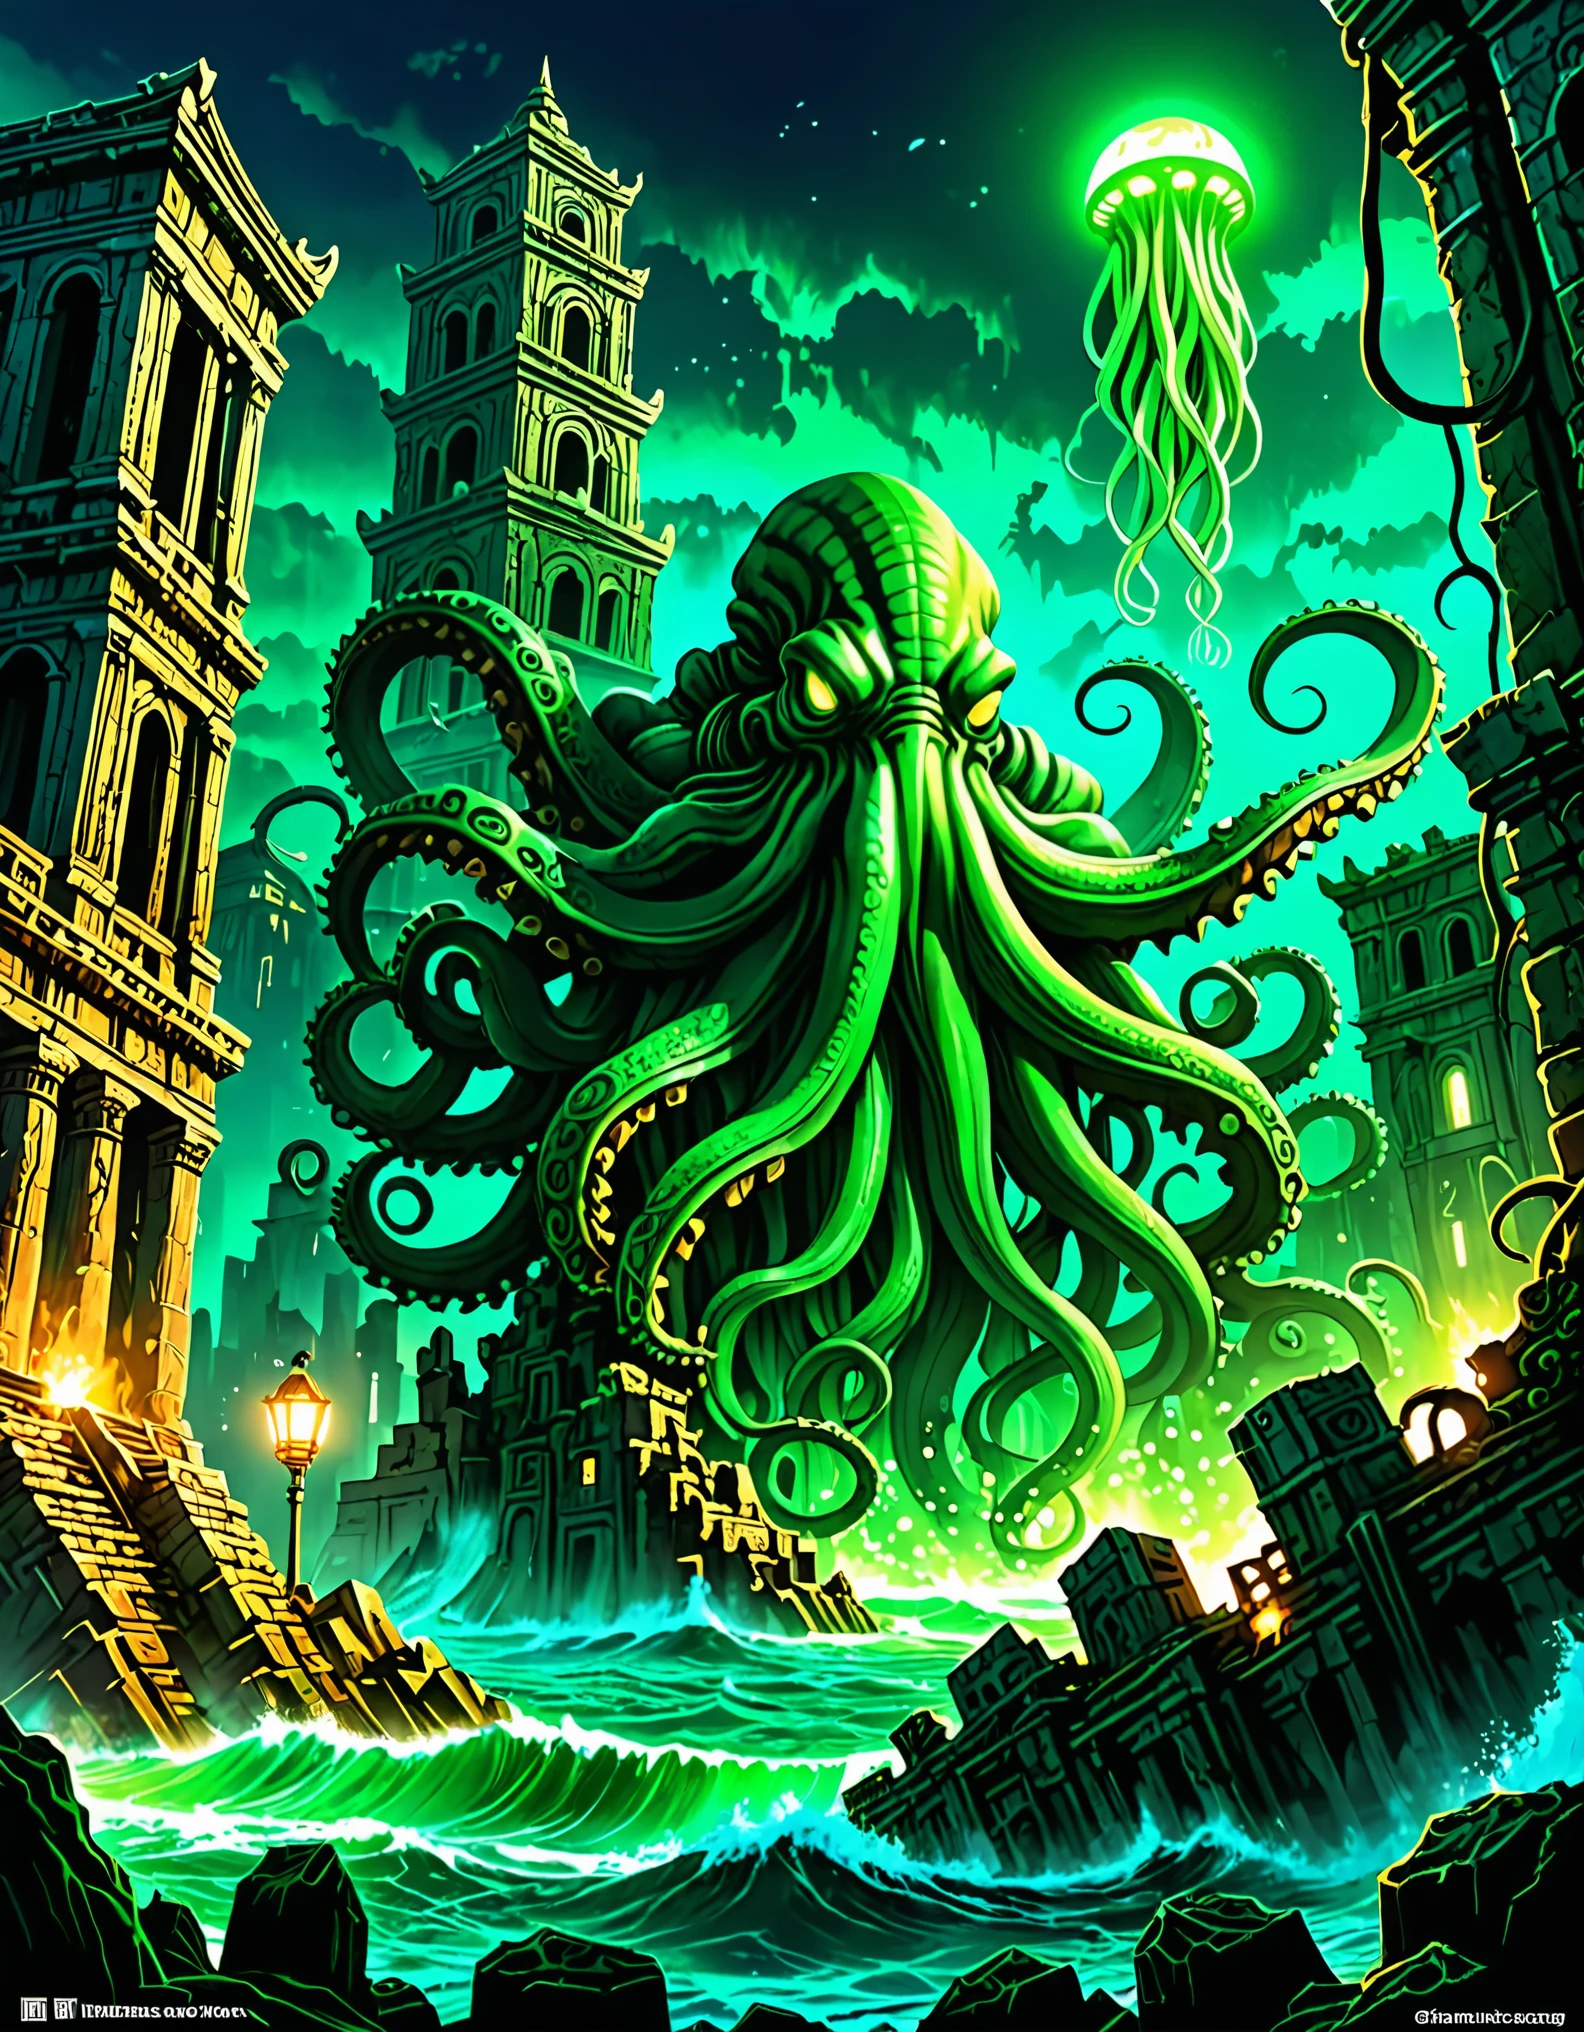 A giant Cthulhu、Awaken from the ruins of an ancient, desolate city。In the darkness of the deep sea、The green light shines mysteriously、The tentacles are moving ominously。Collapsed buildings and ancient artifacts can be seen in the background.。